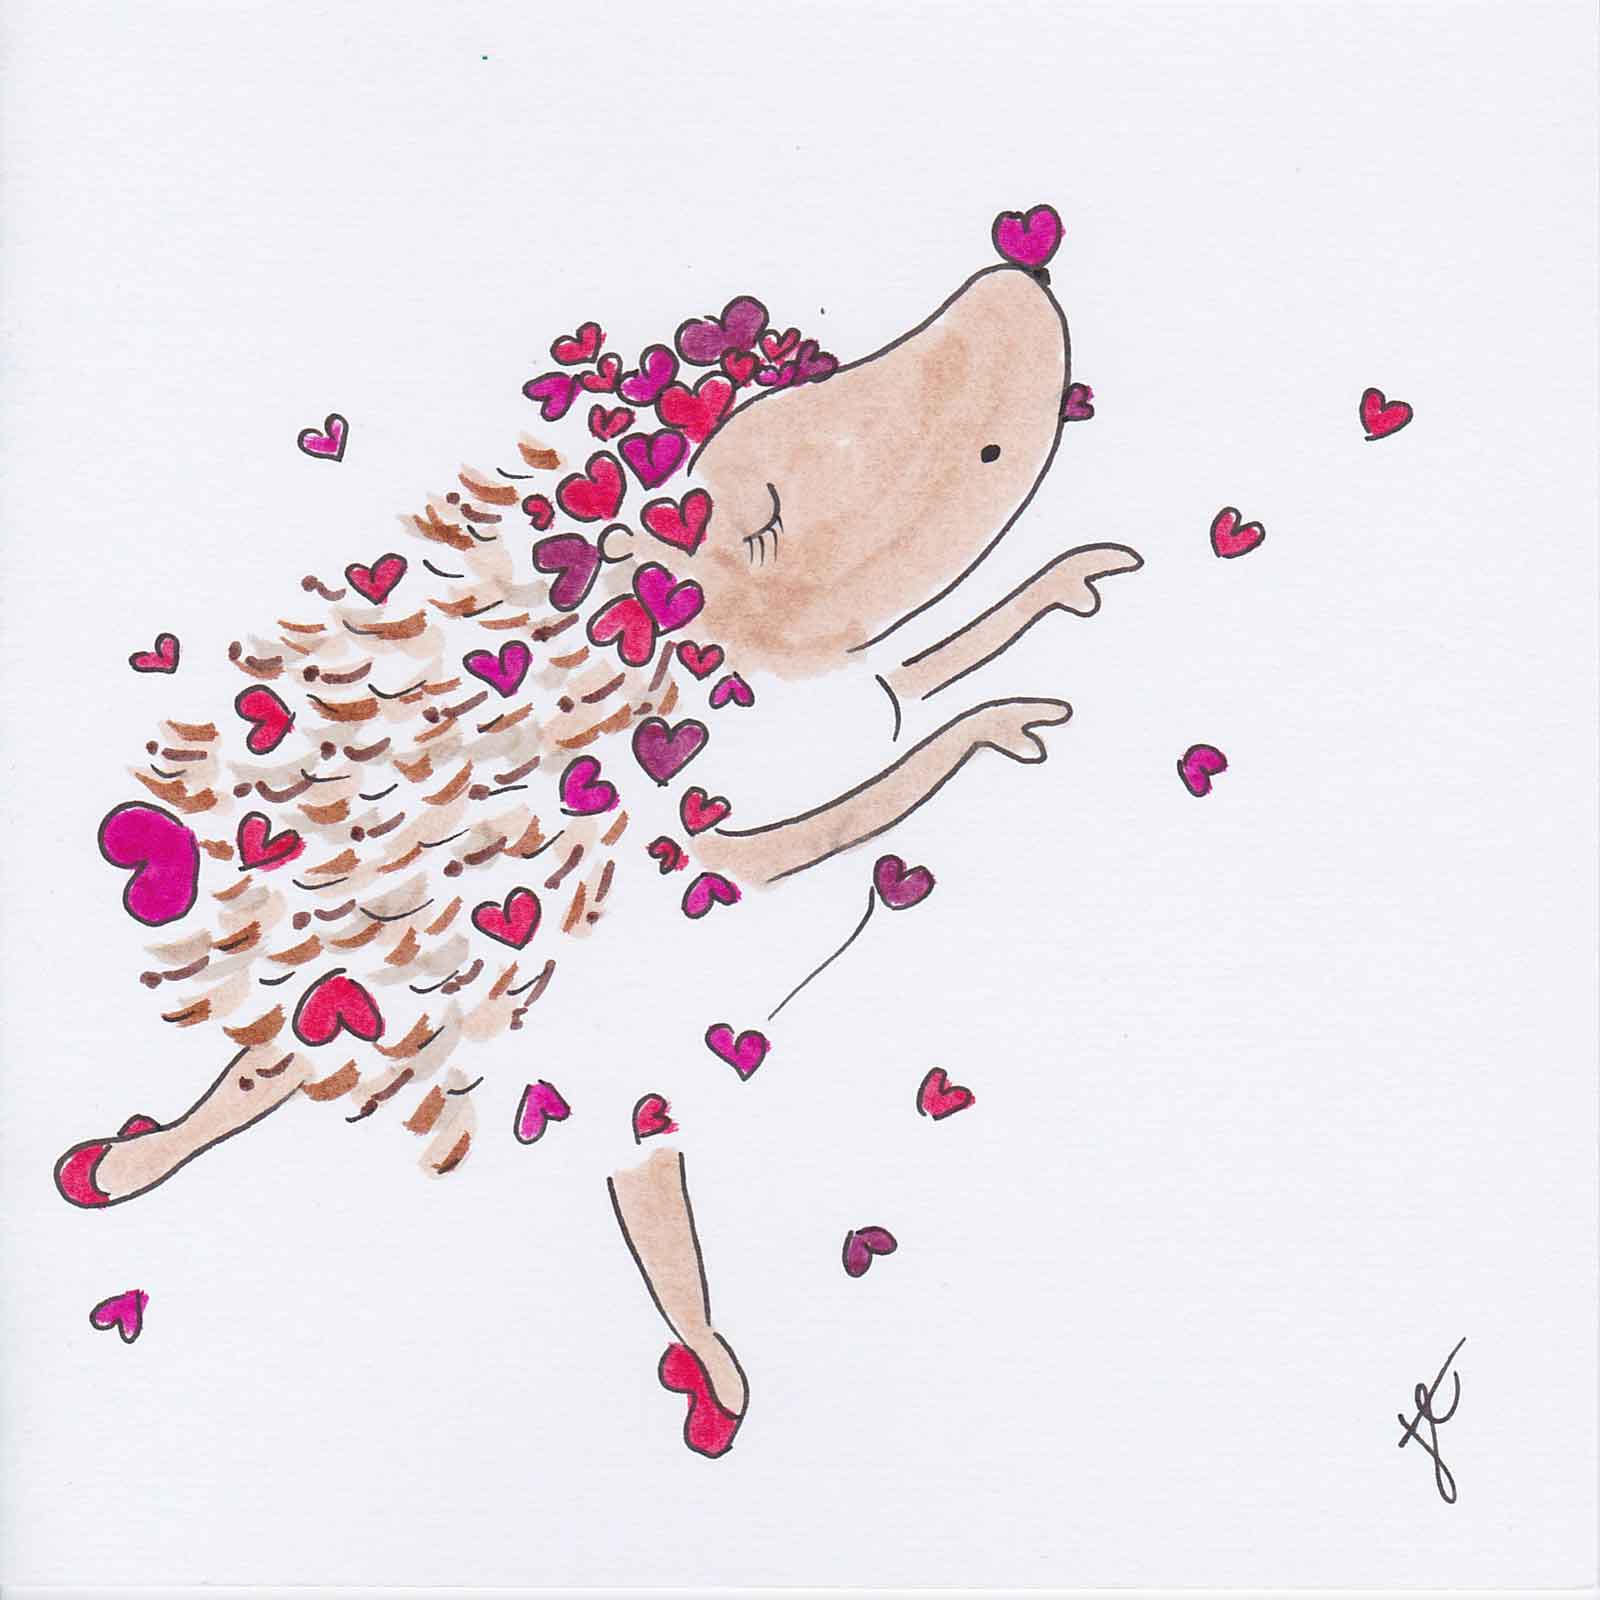 Hedgie Ballettoons illustrated card with hearts